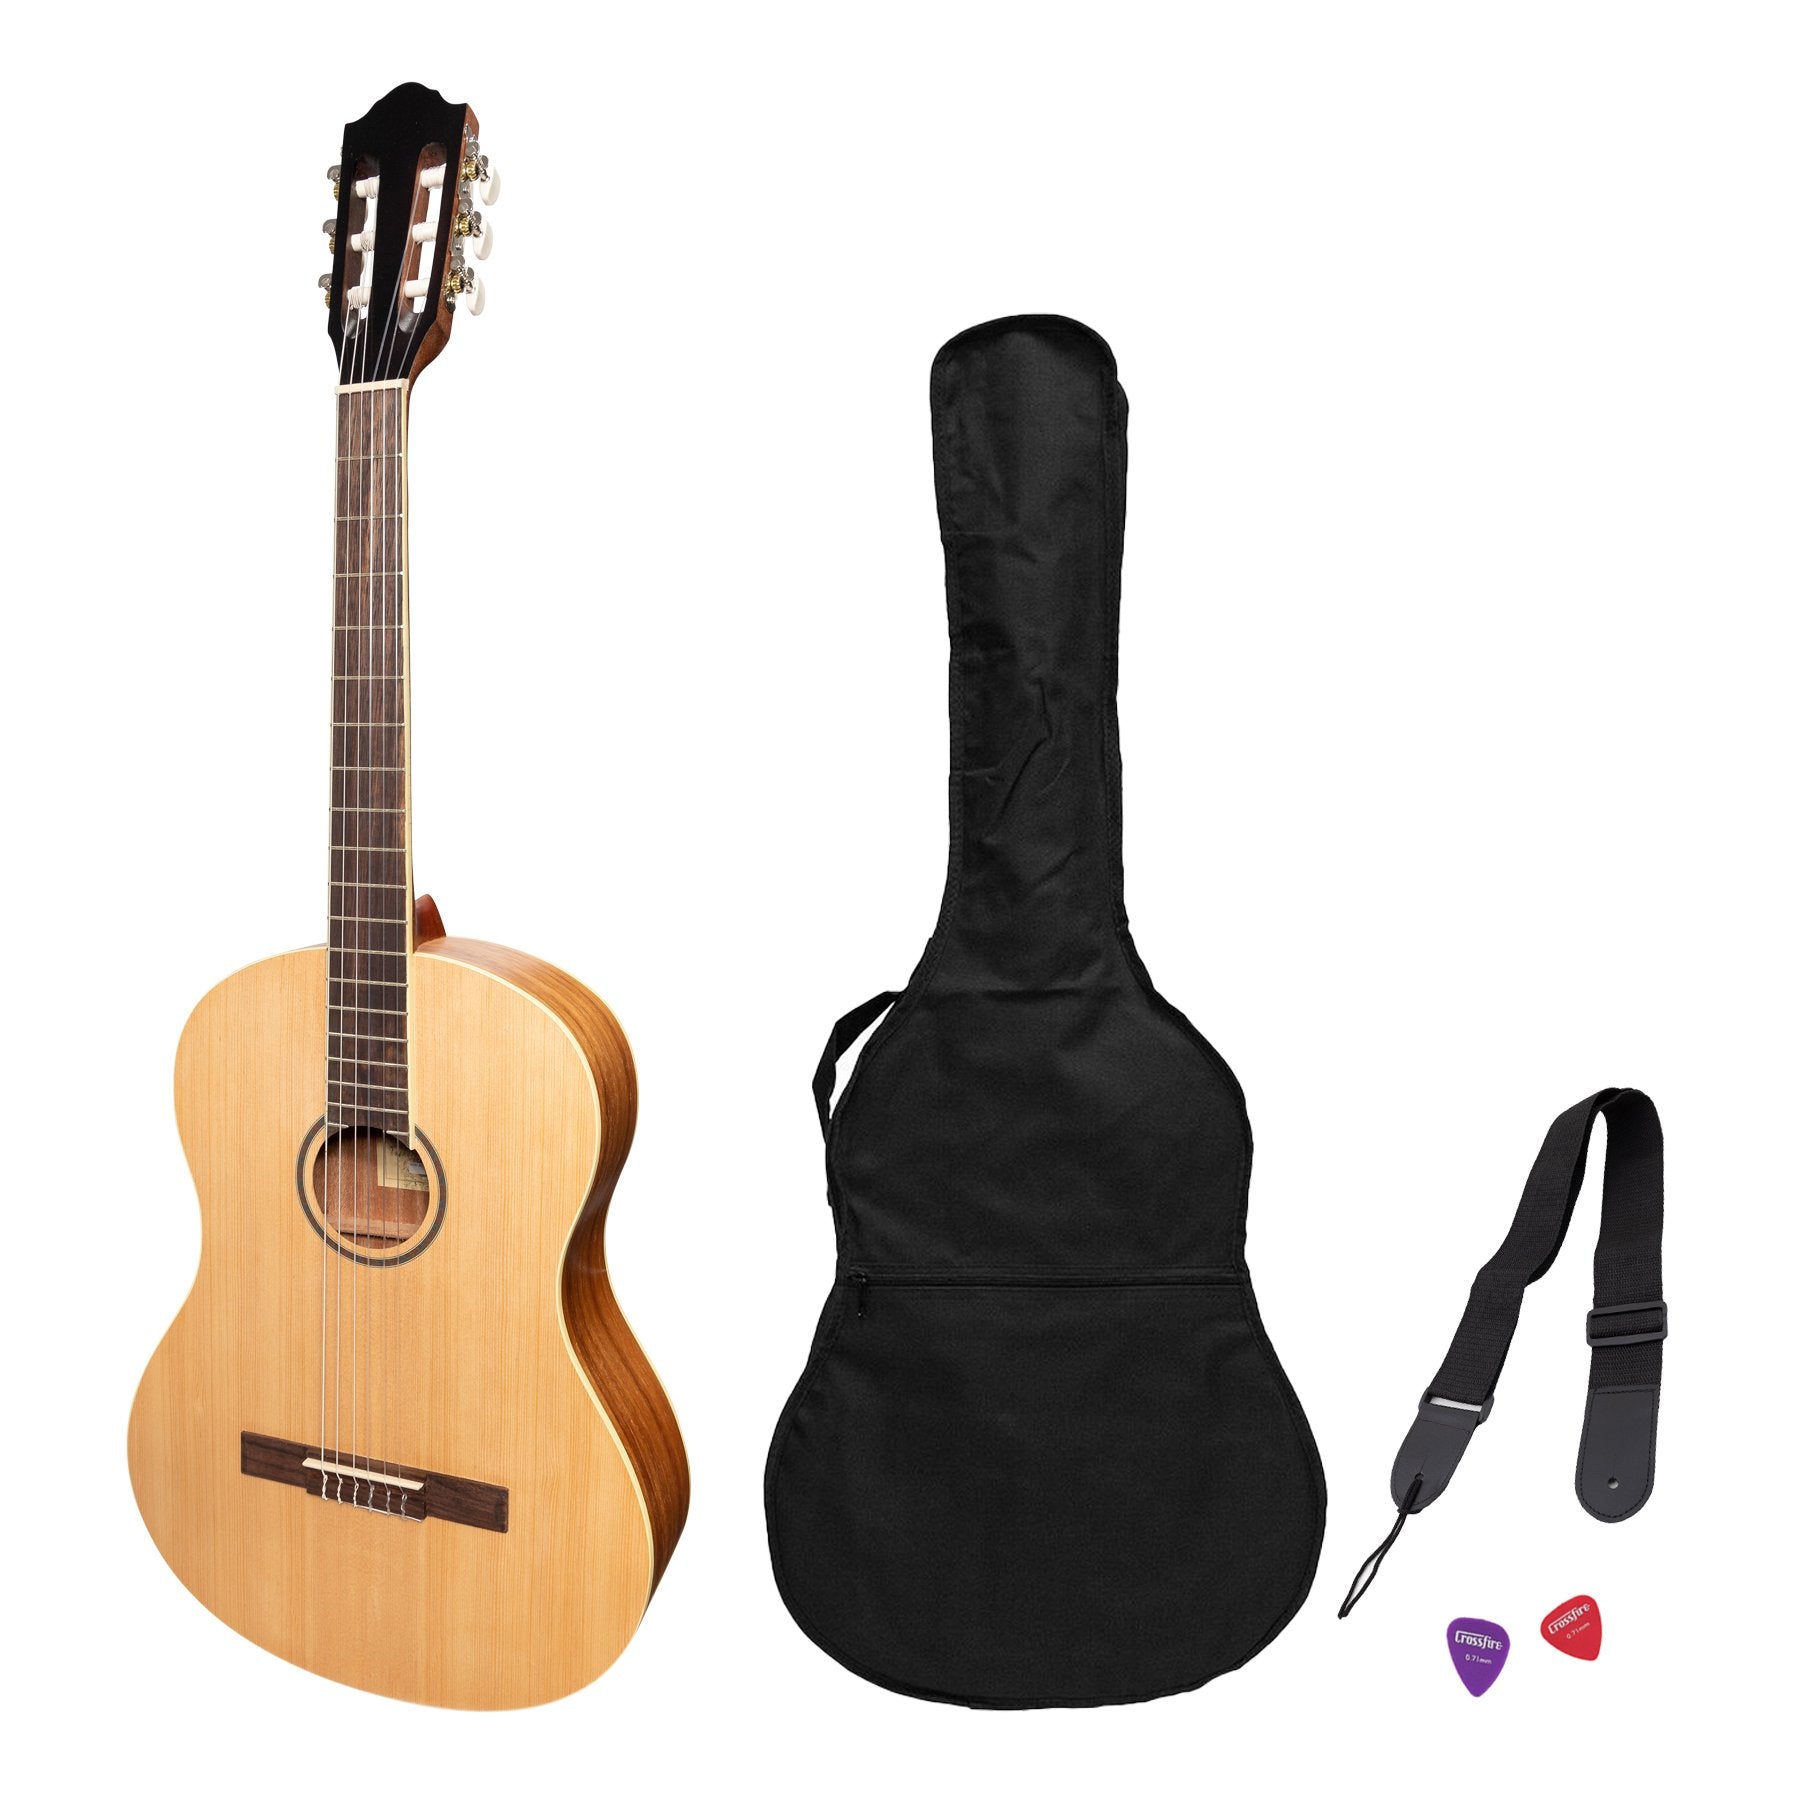 Martinez 'Slim Jim' Full Size Student Classical Guitar Pack with Built In Tuner (Spruce/Rosewood)-MP-SJ44T-SR